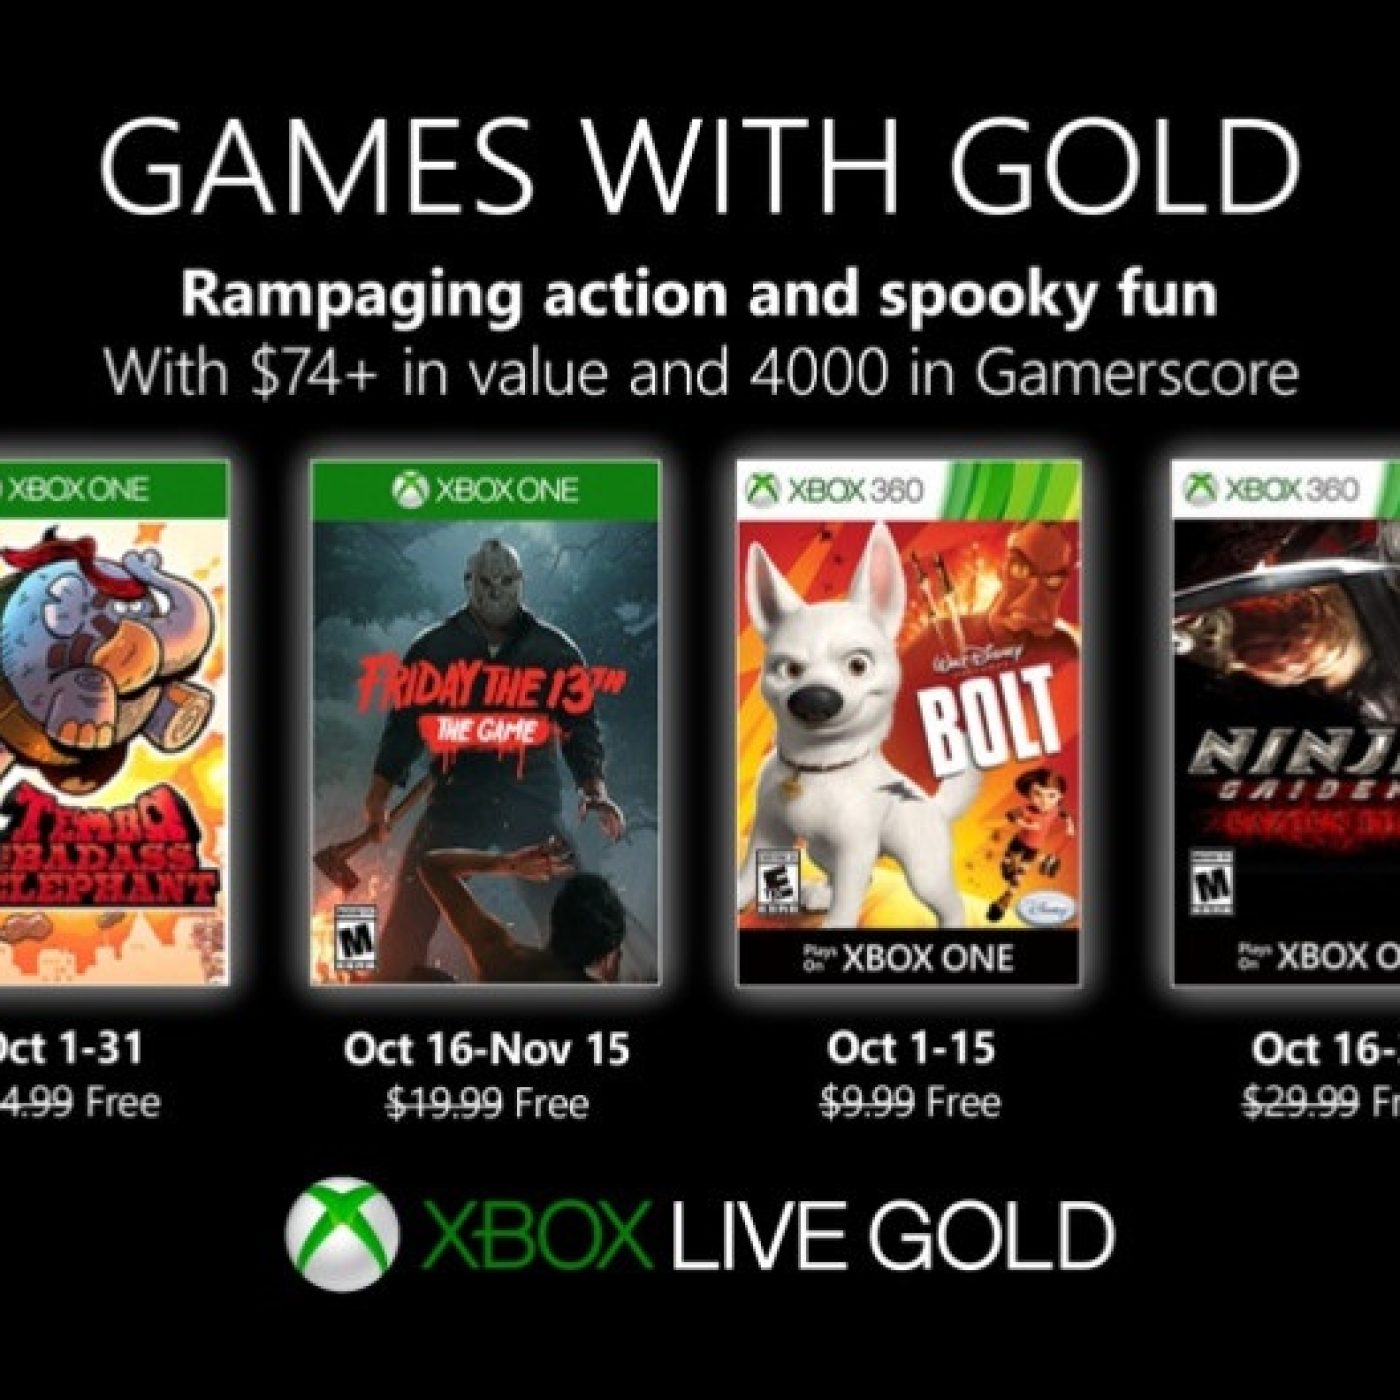 No more Xbox 360 games in Xbox Games with Gold this October